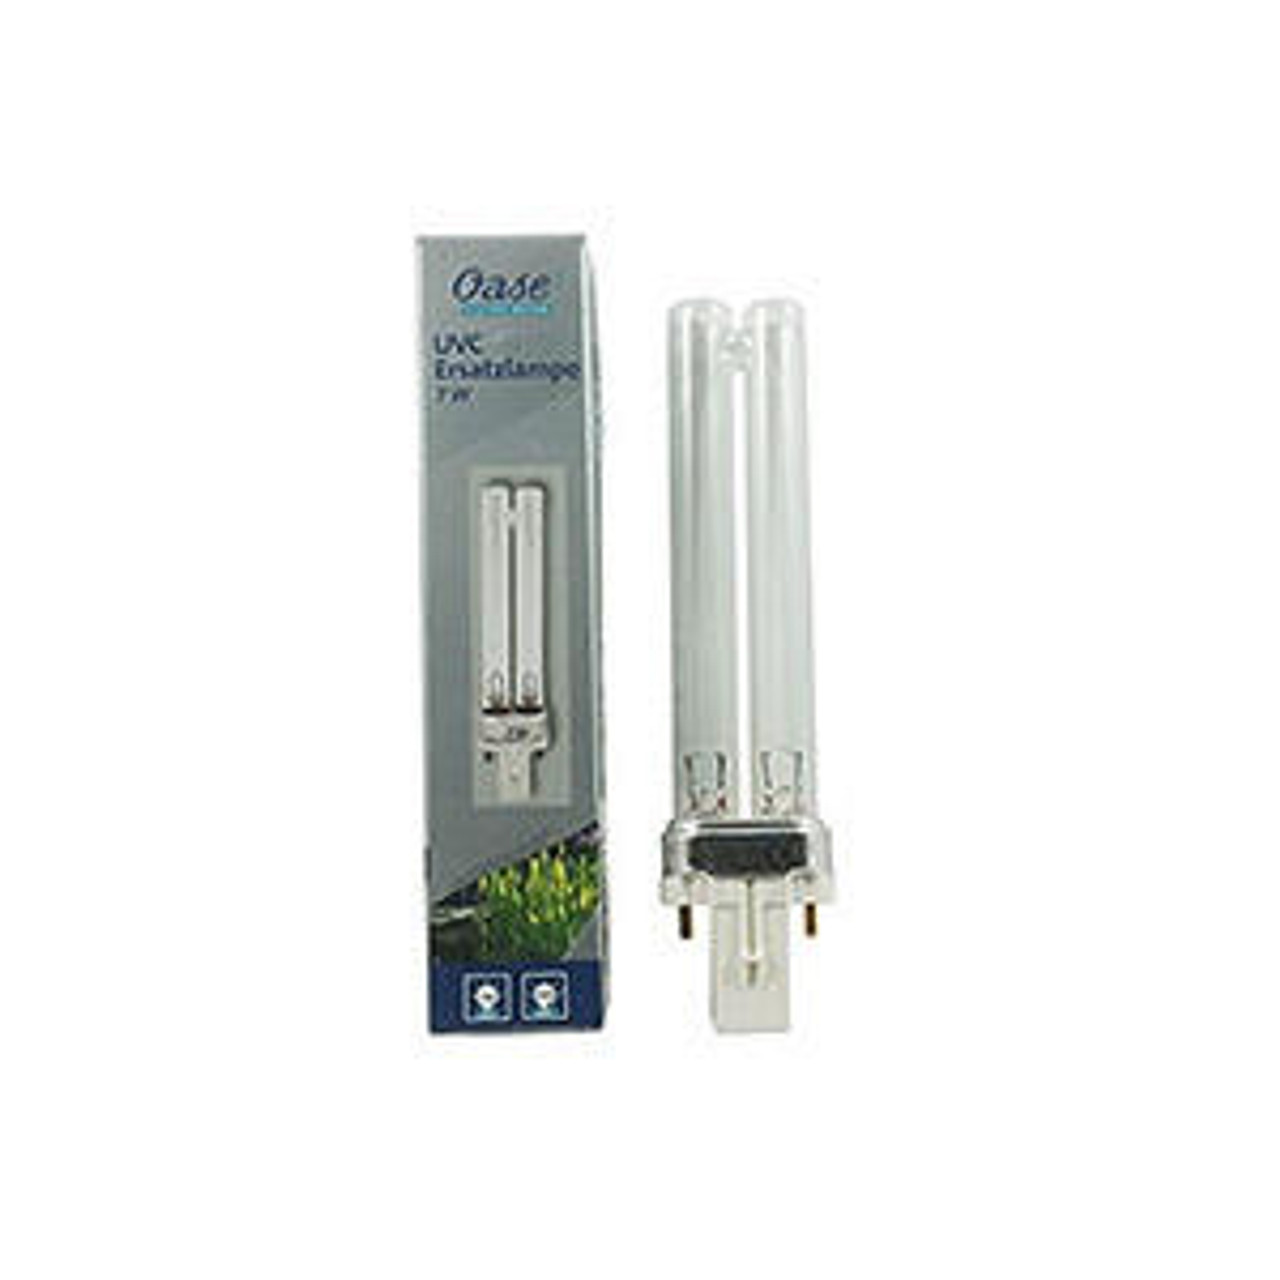 Lang Trouwens Absoluut 7 watt UV lamp for Oase Fitral 700 or BioPress 1000 | AquaNooga